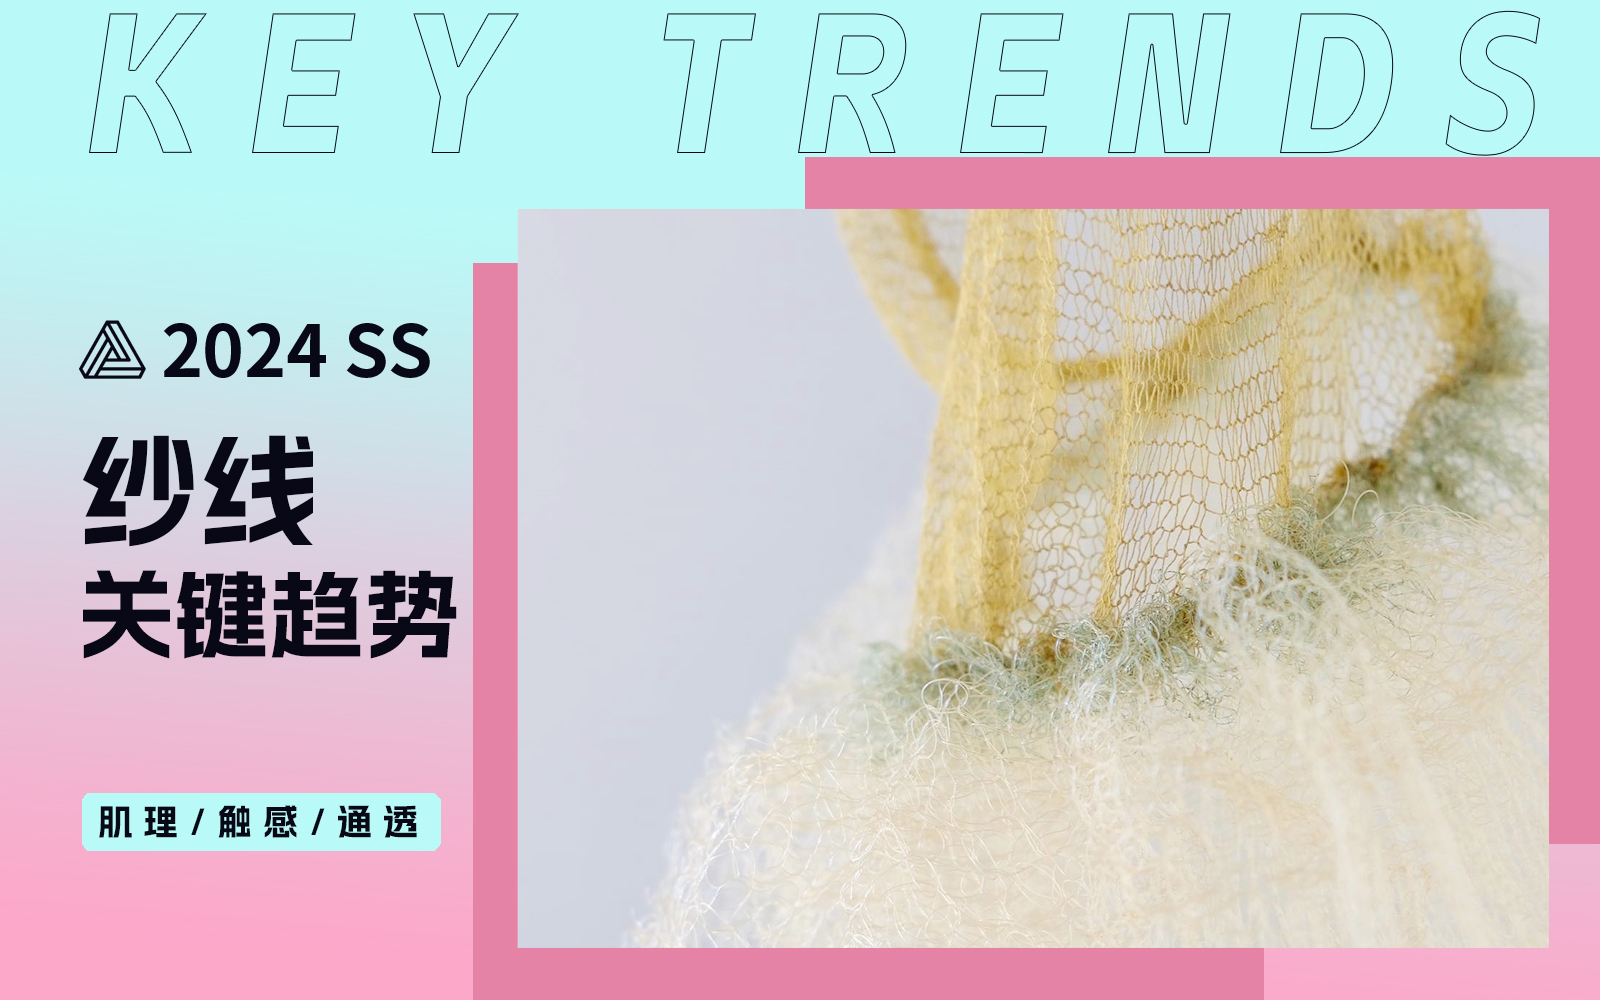 Texture & Tactility -- The S/S 2024 Yarn Trend for Knitwear